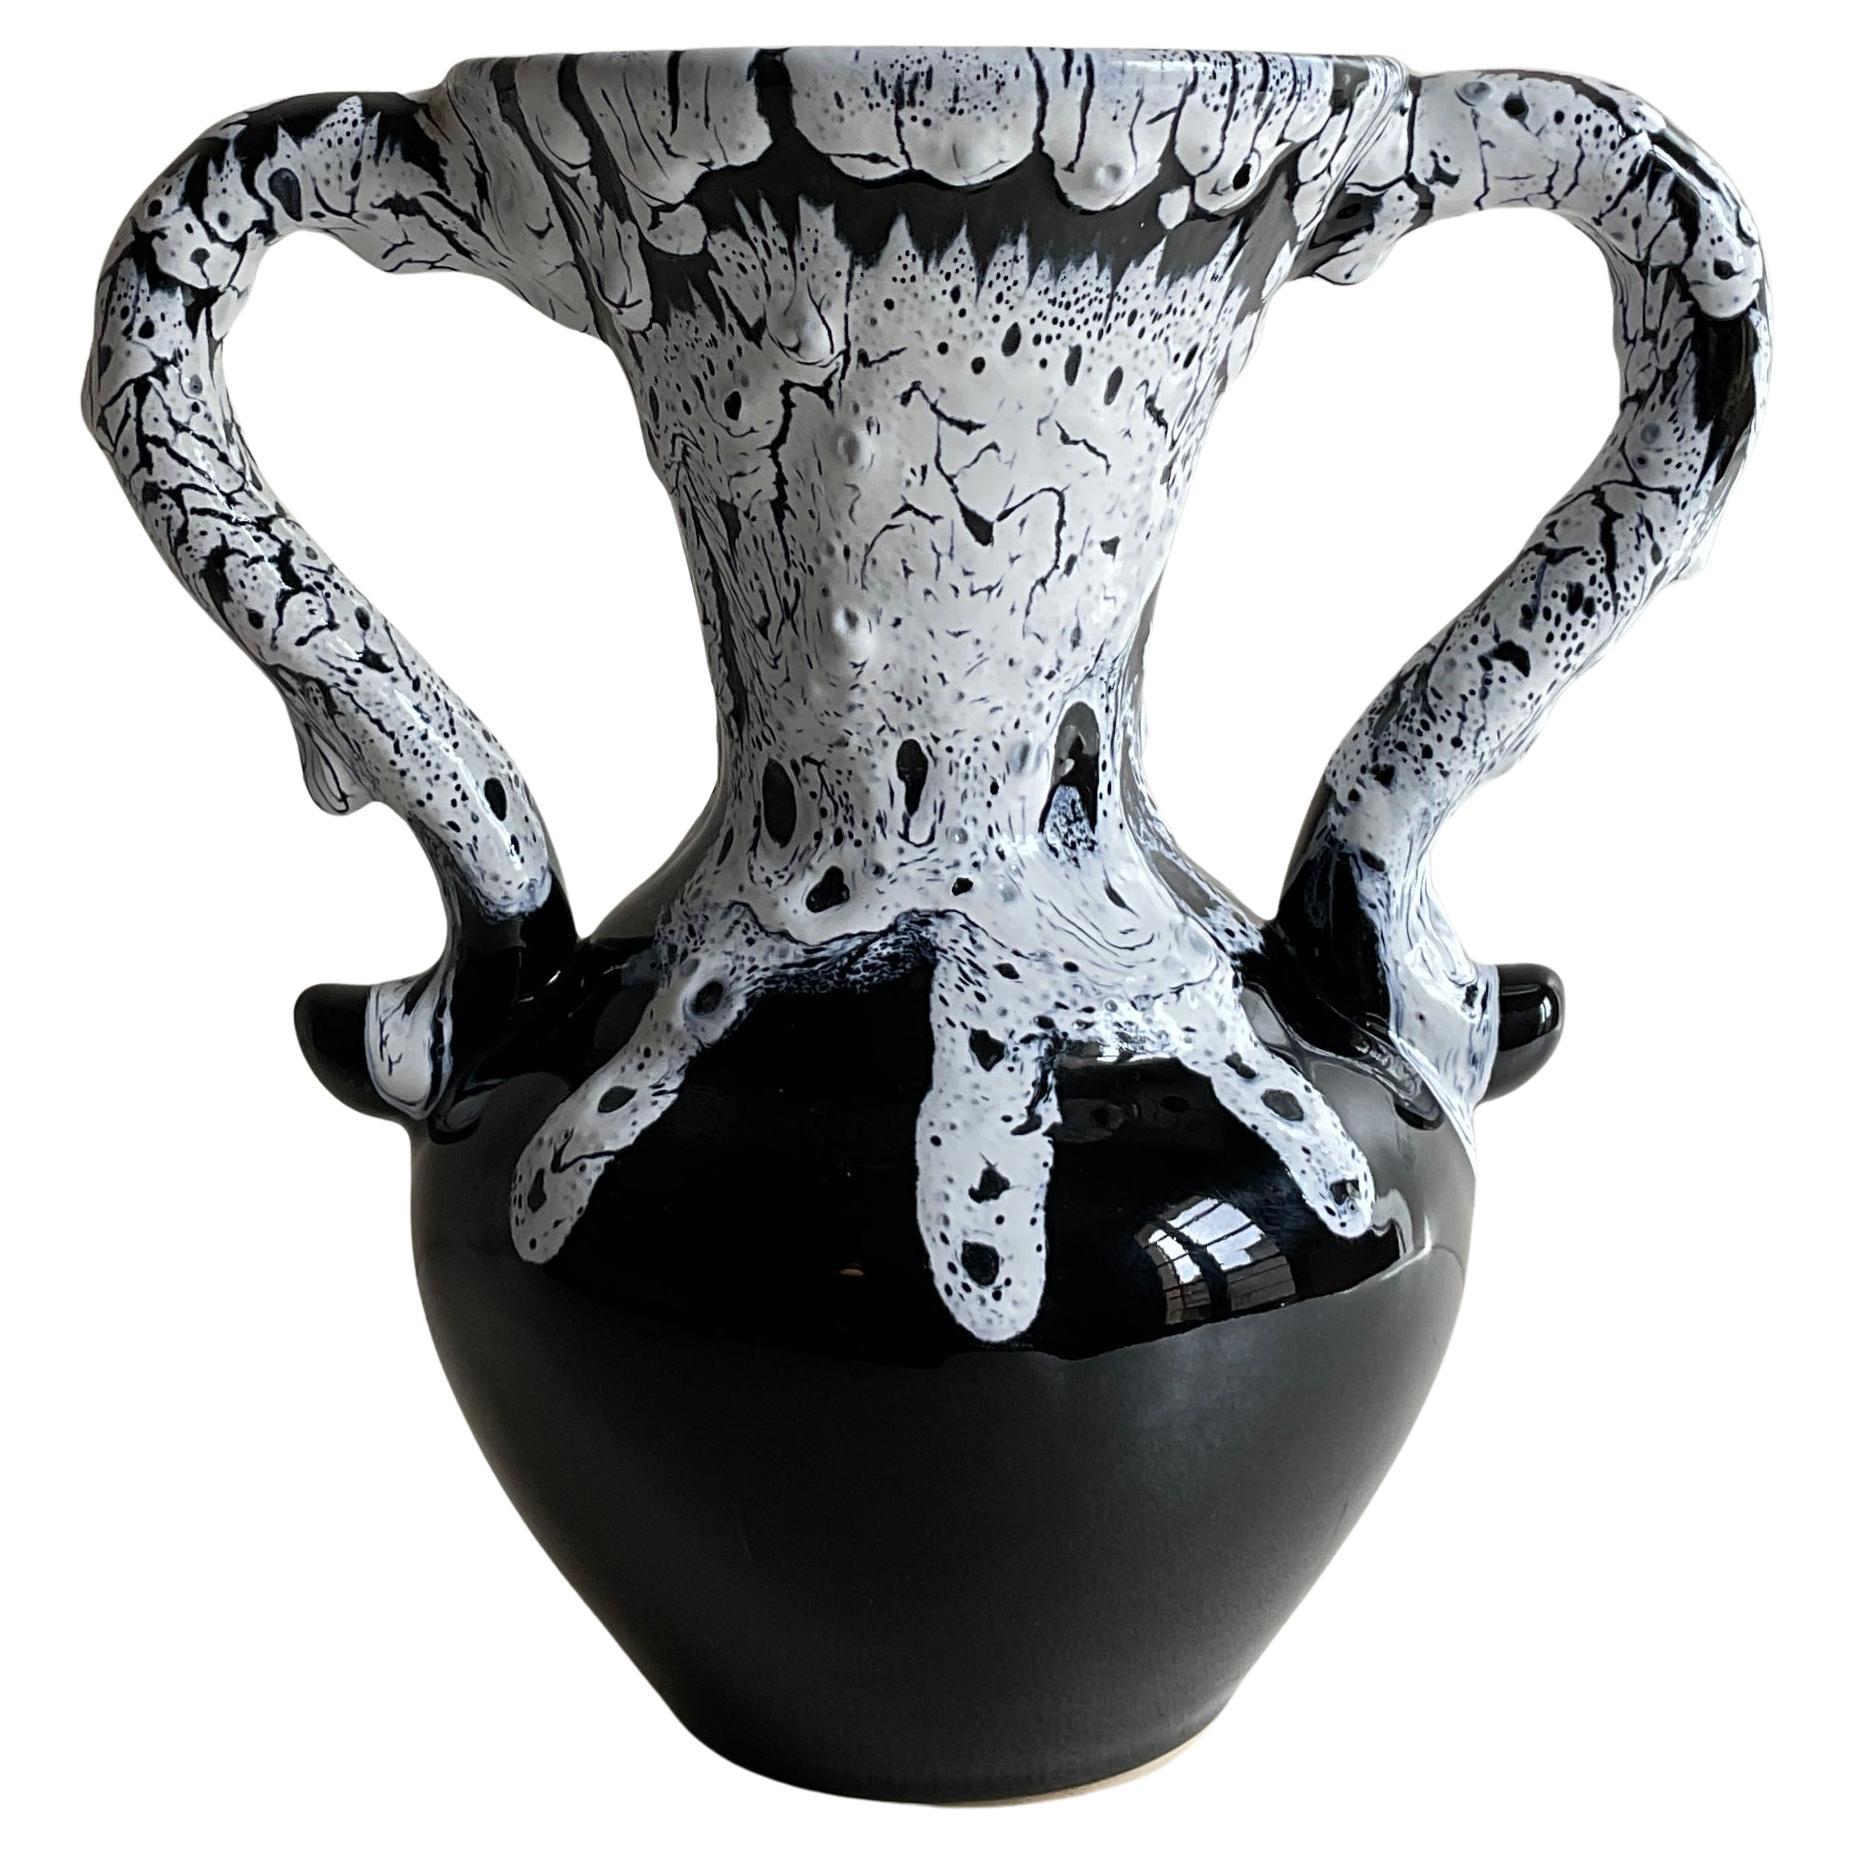 Fat Lava Vase With Handles From Fontaine De Vaucluse France